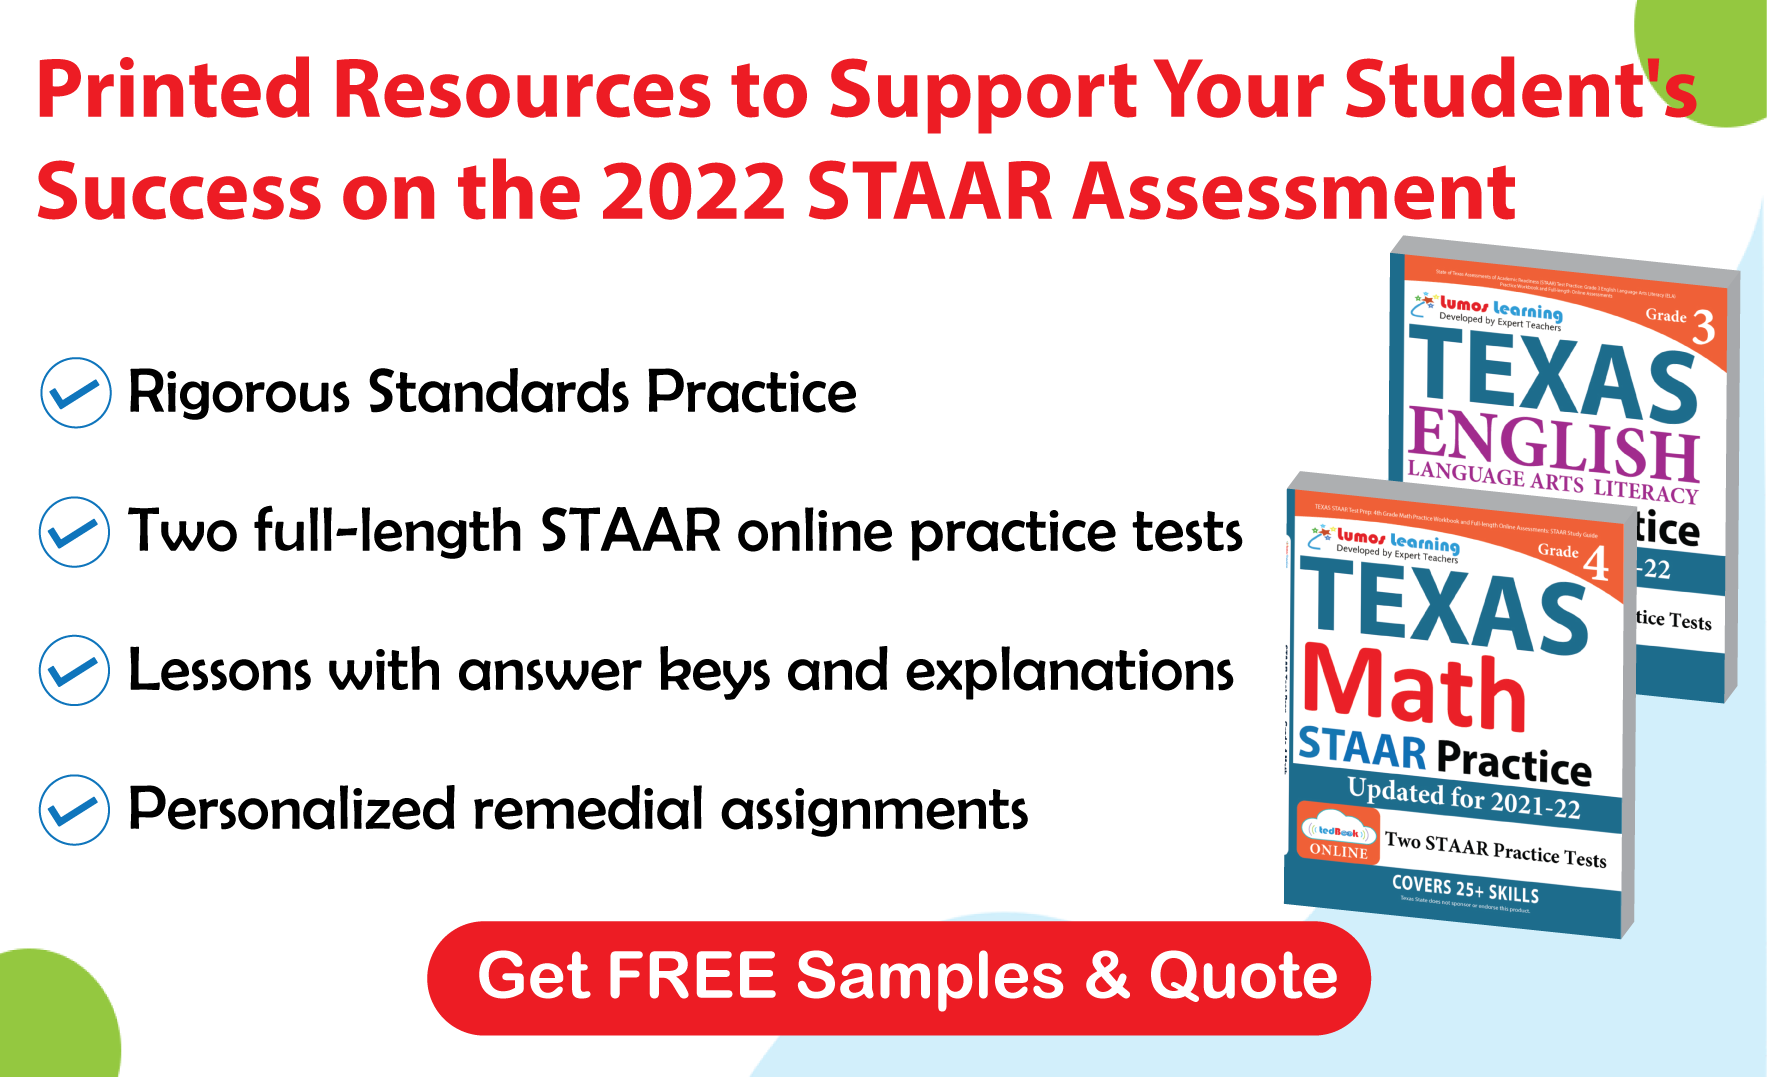 Lumos tedBook™ offers both Math and ELA printed workbooks, that are specifically designed to improve student achievement and help them succeed on the STAAR Assessments.